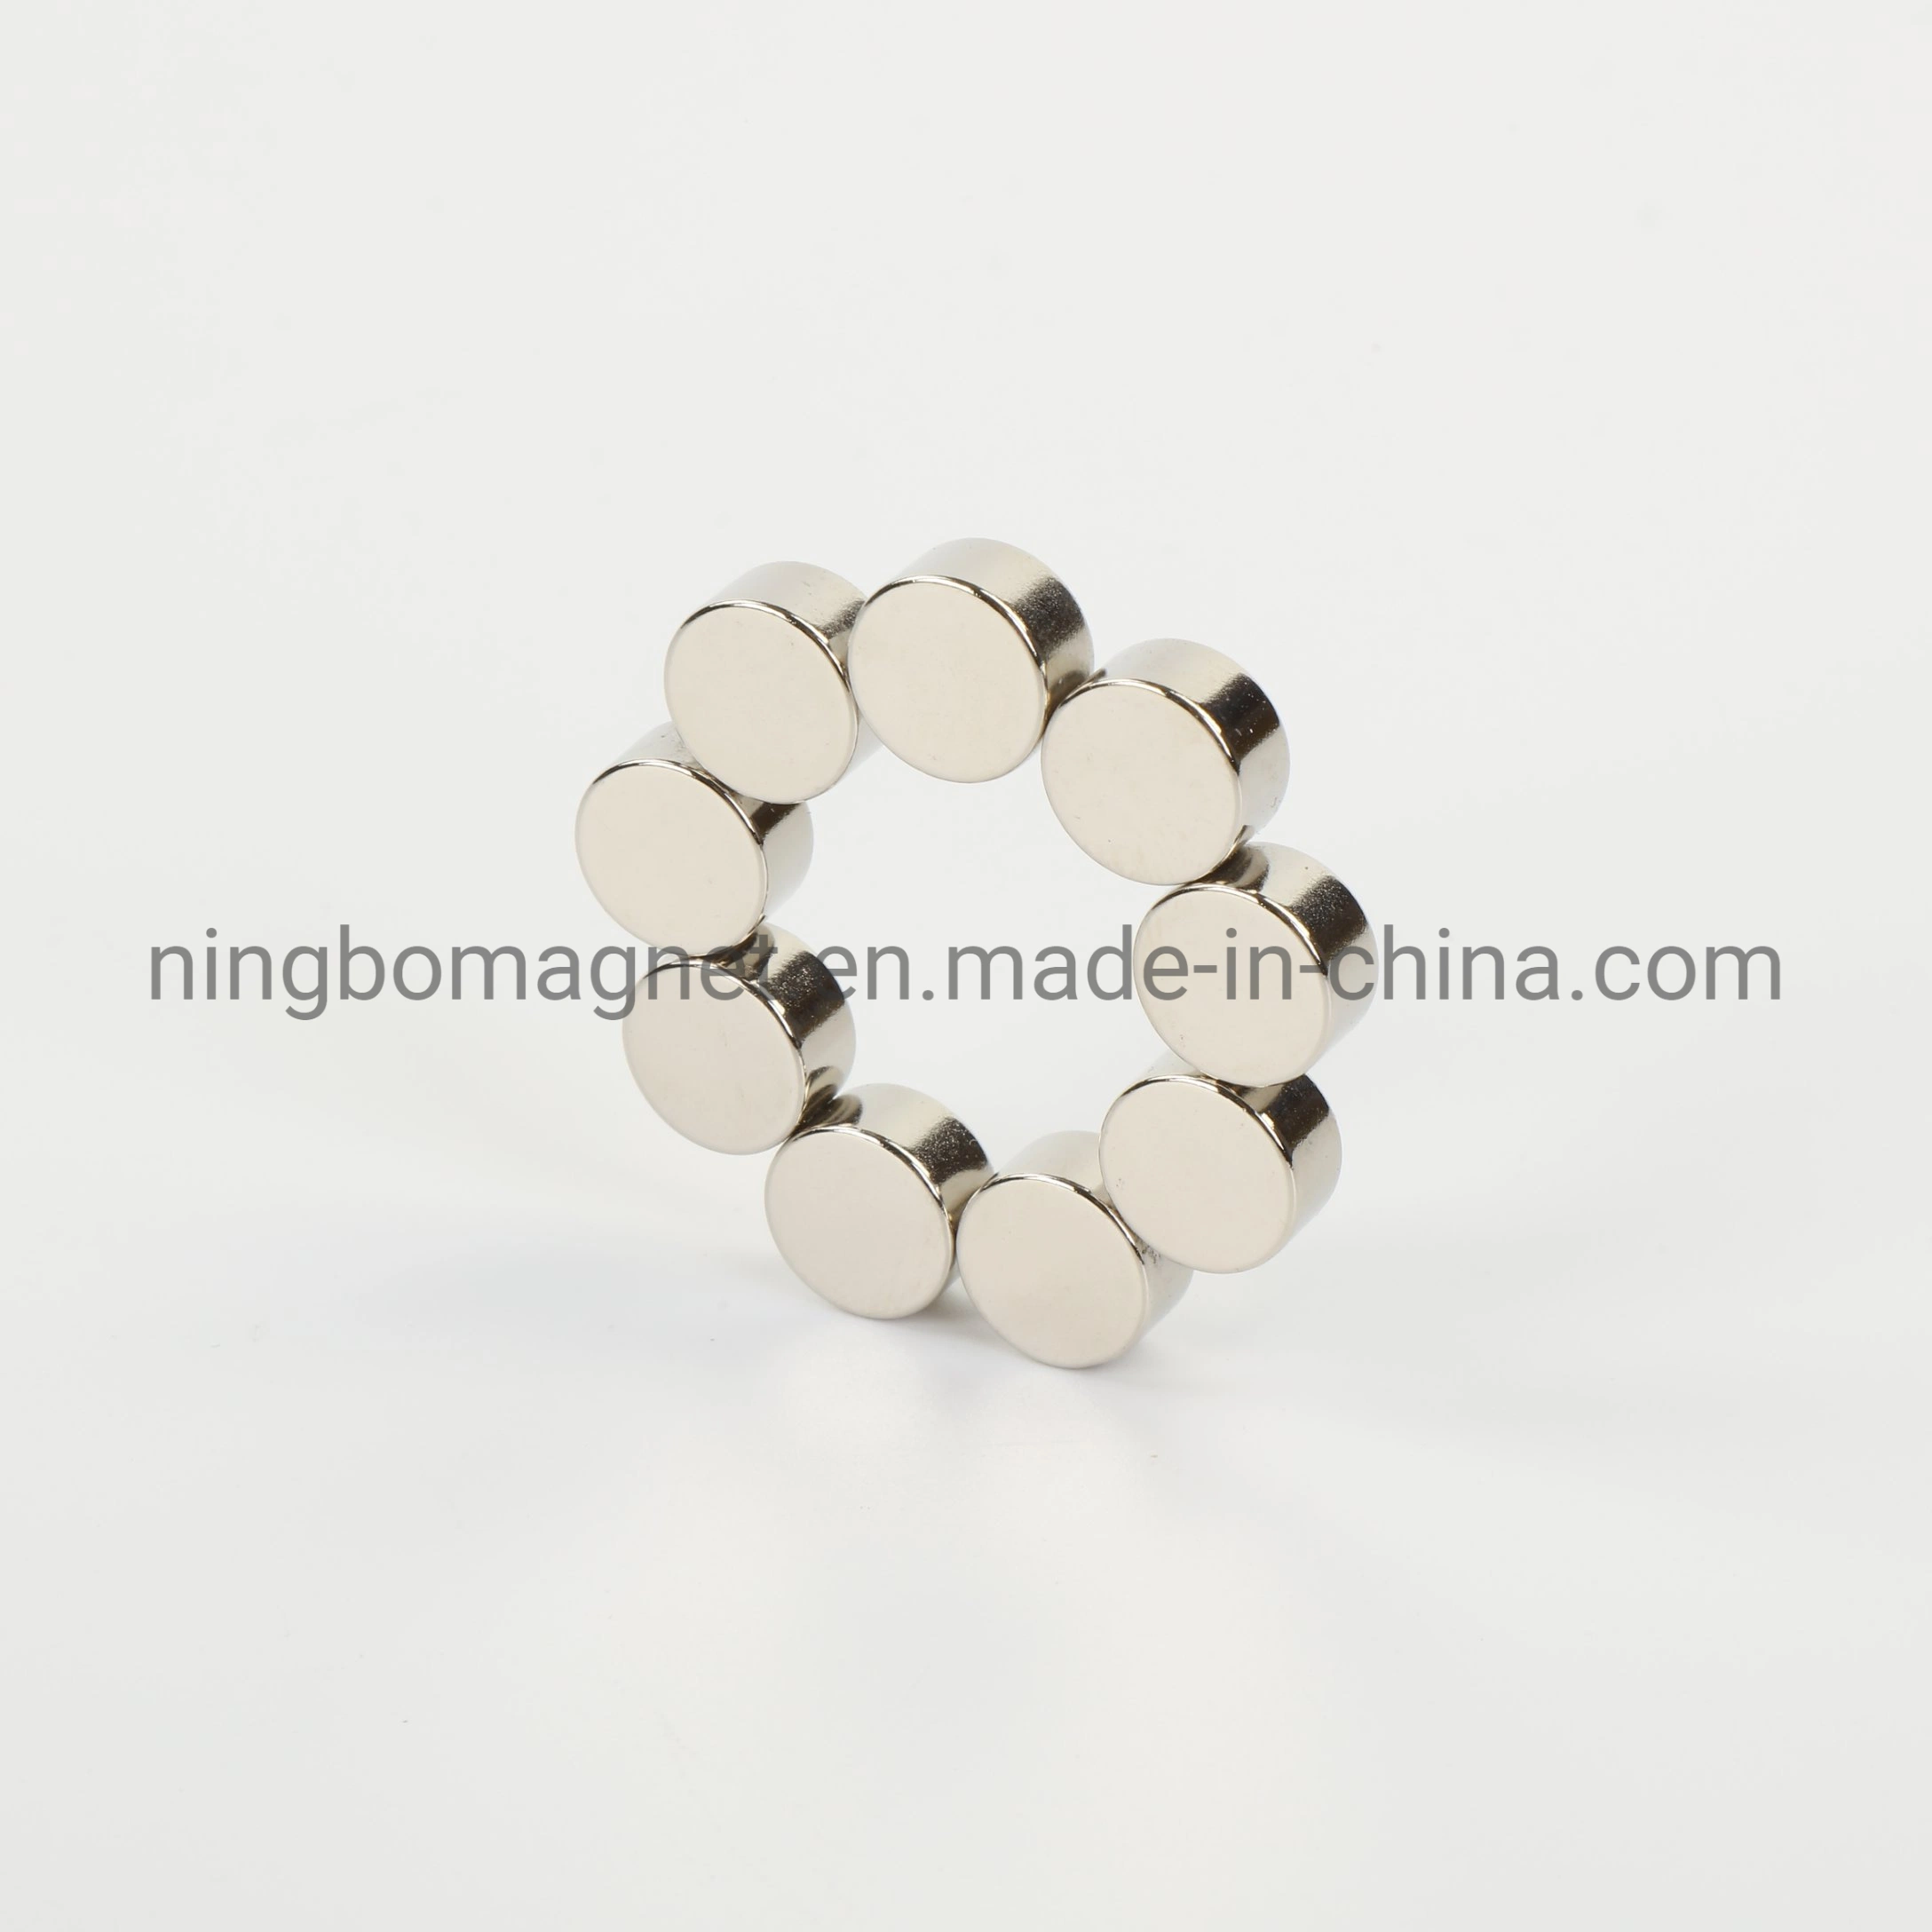 Customized Sintered NdFeB Neodymium Permanent Disc Magnet for Toys, Craft